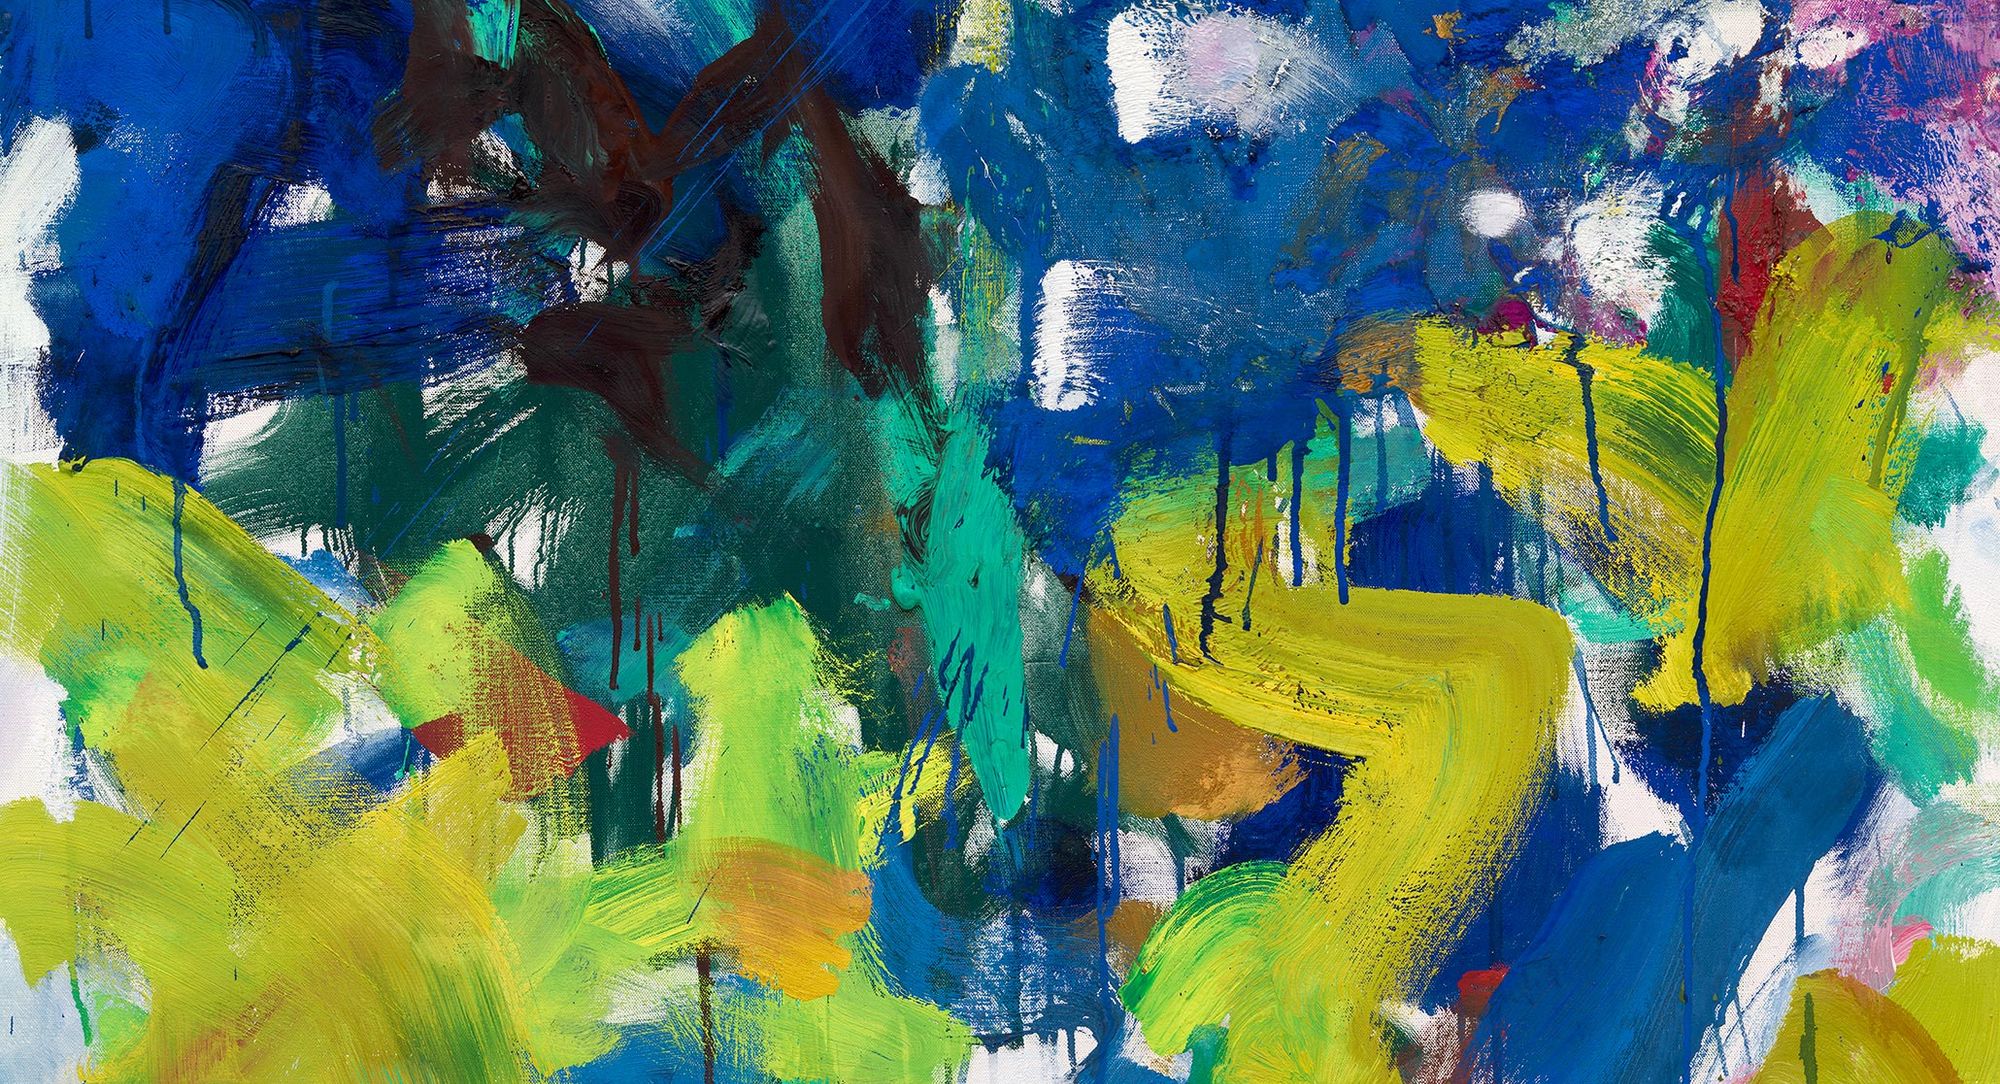 Louis Vuitton: Vuitton accused over Joan Mitchell paintings in